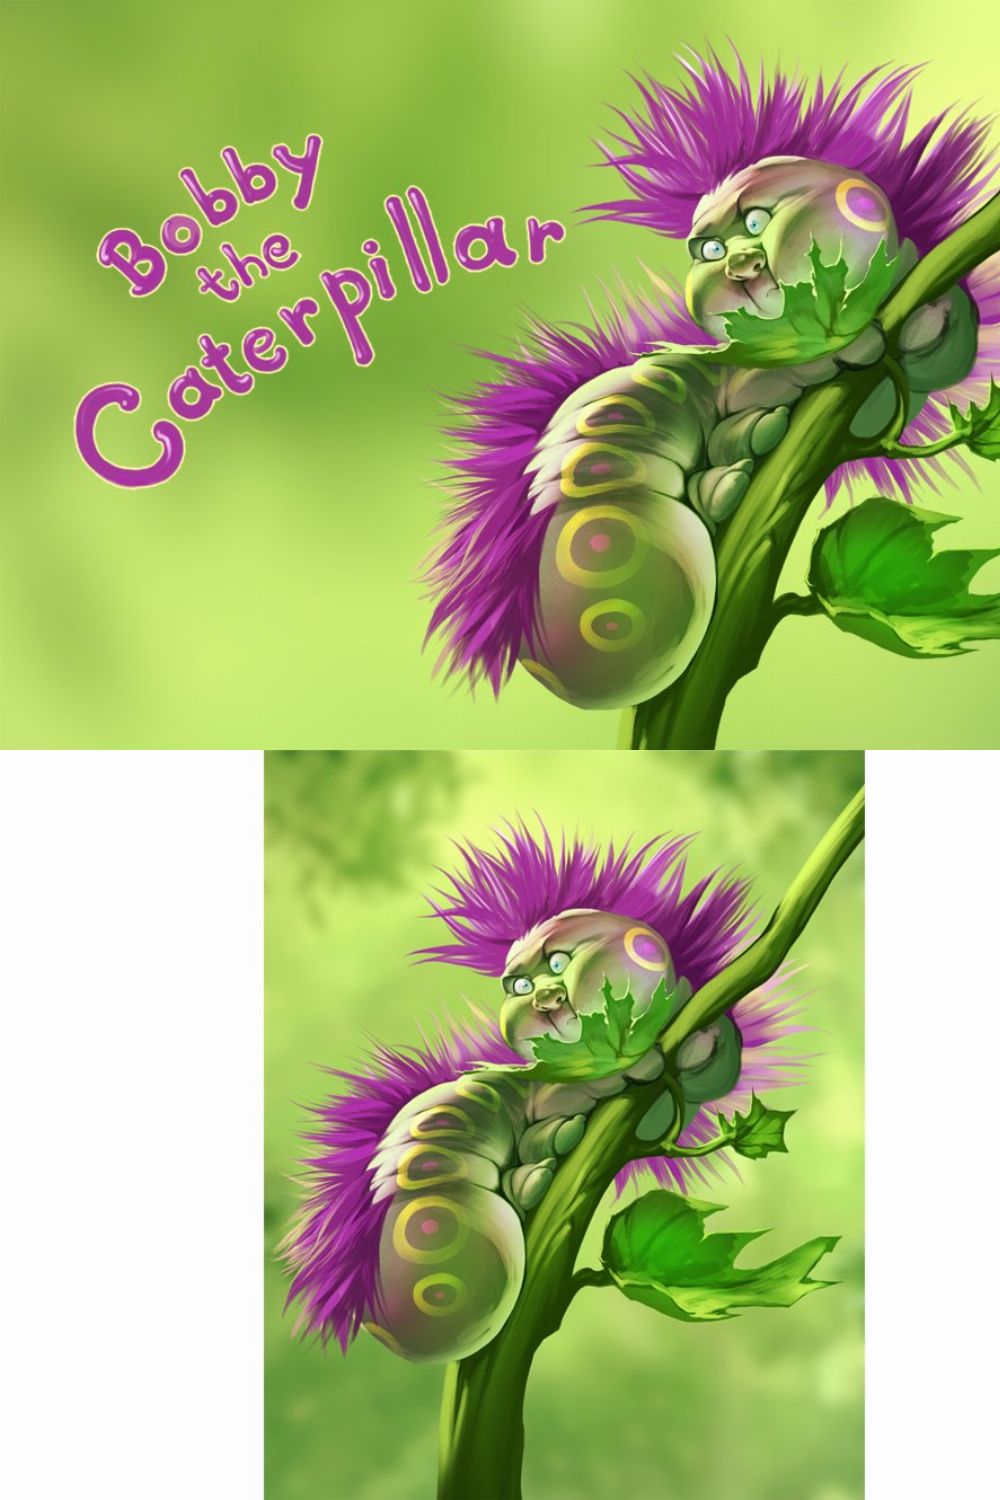 Bobby the Caterpillar pinterest preview image.